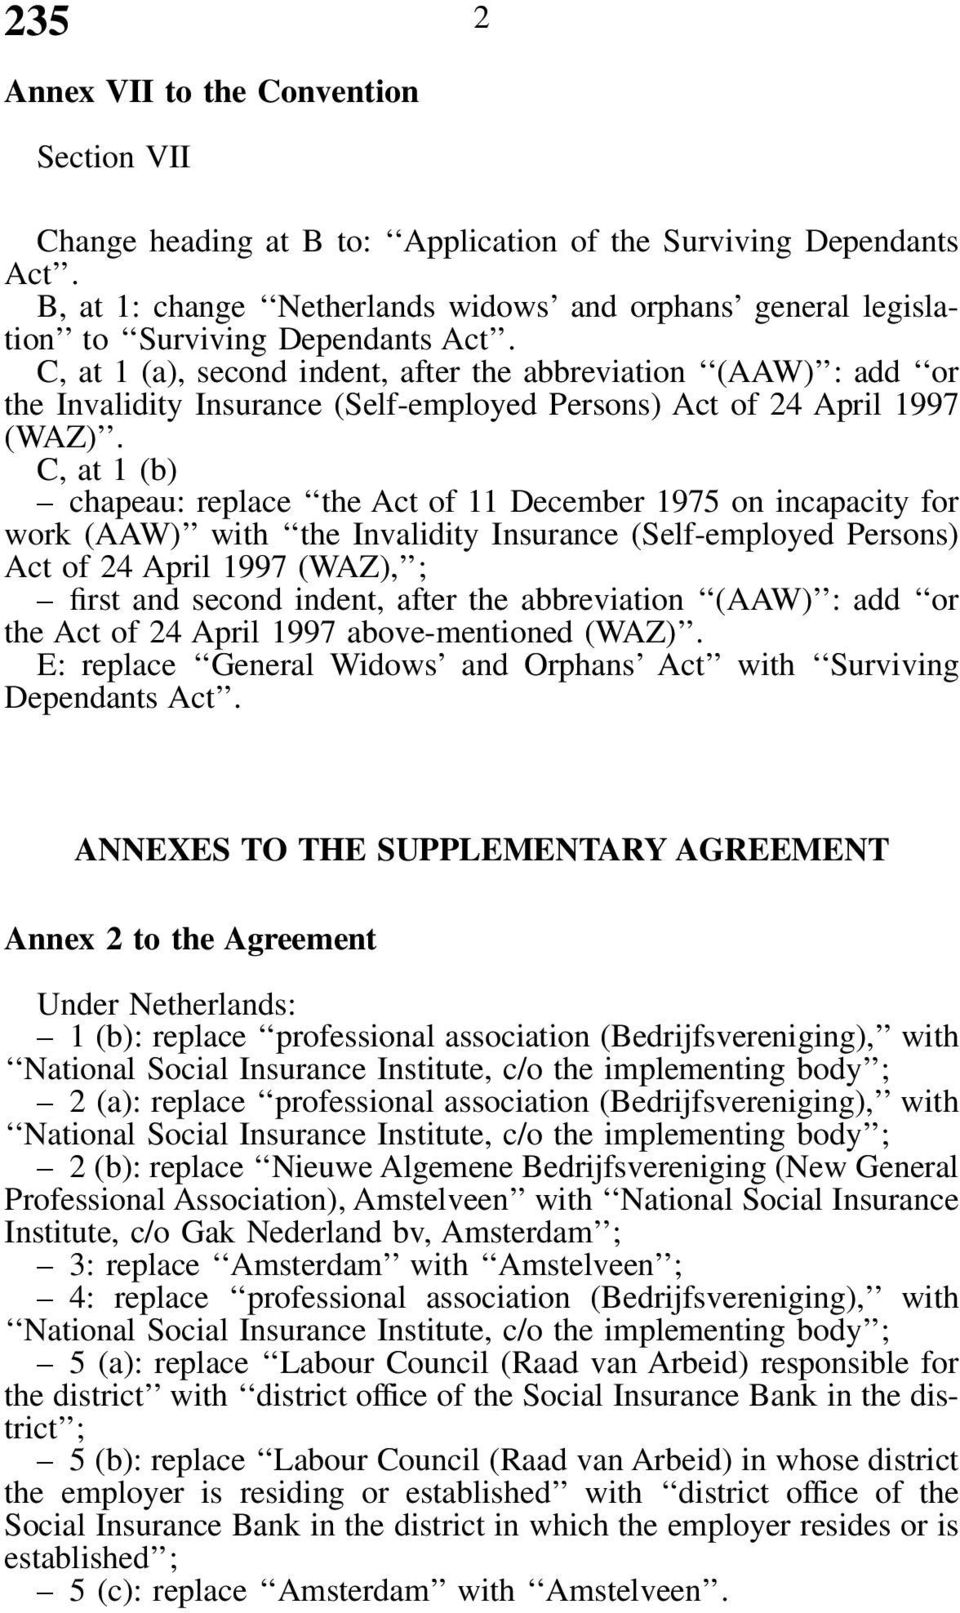 C, at 1 (a), second indent, after the abbreviation (AAW) : add or the Invalidity Insurance (Self-employed Persons) Act of 24 April 1997 (WAZ).